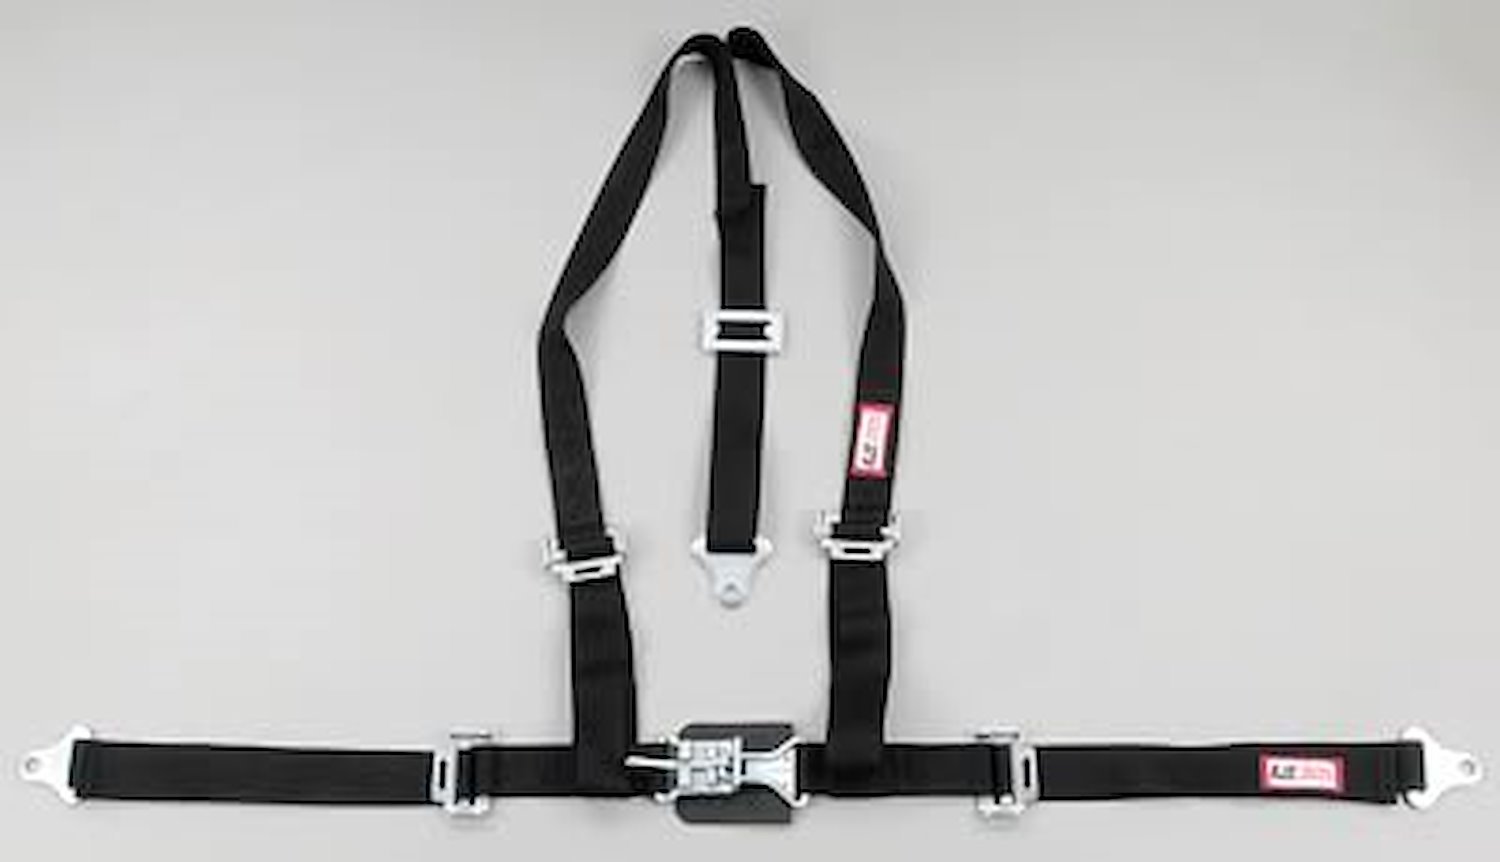 NON-SFI L&L HARNESS 2 PULL DOWN Lap Belt w/adjuster 2 S.H. V ROLL BAR Mount ALL SNAP ENDS RED